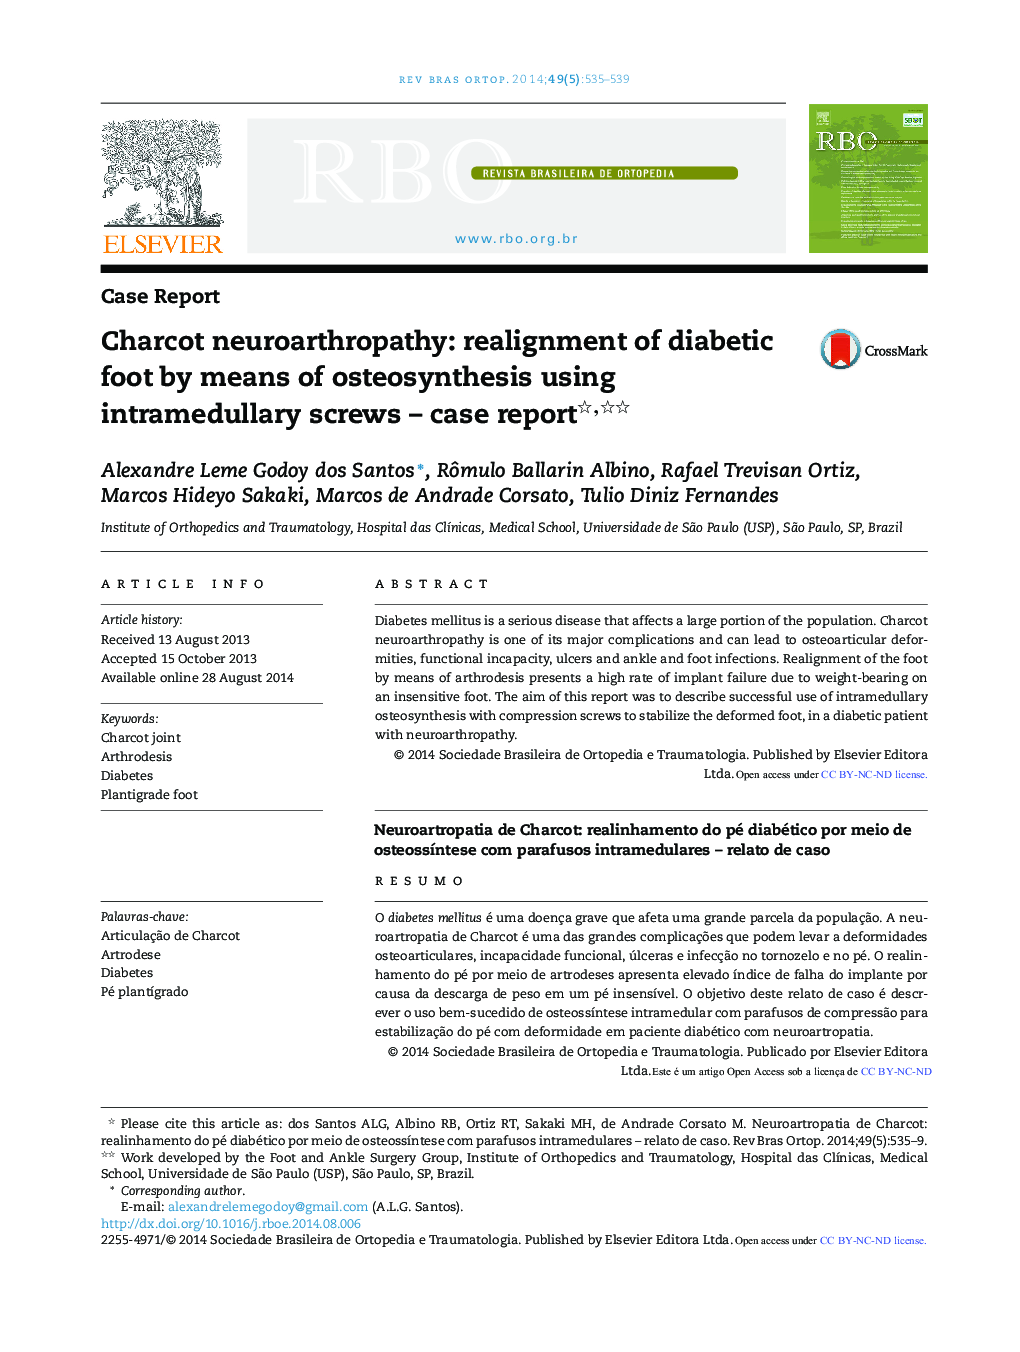 Charcot neuroarthropathy: realignment of diabetic foot by means of osteosynthesis using intramedullary screws – case report 